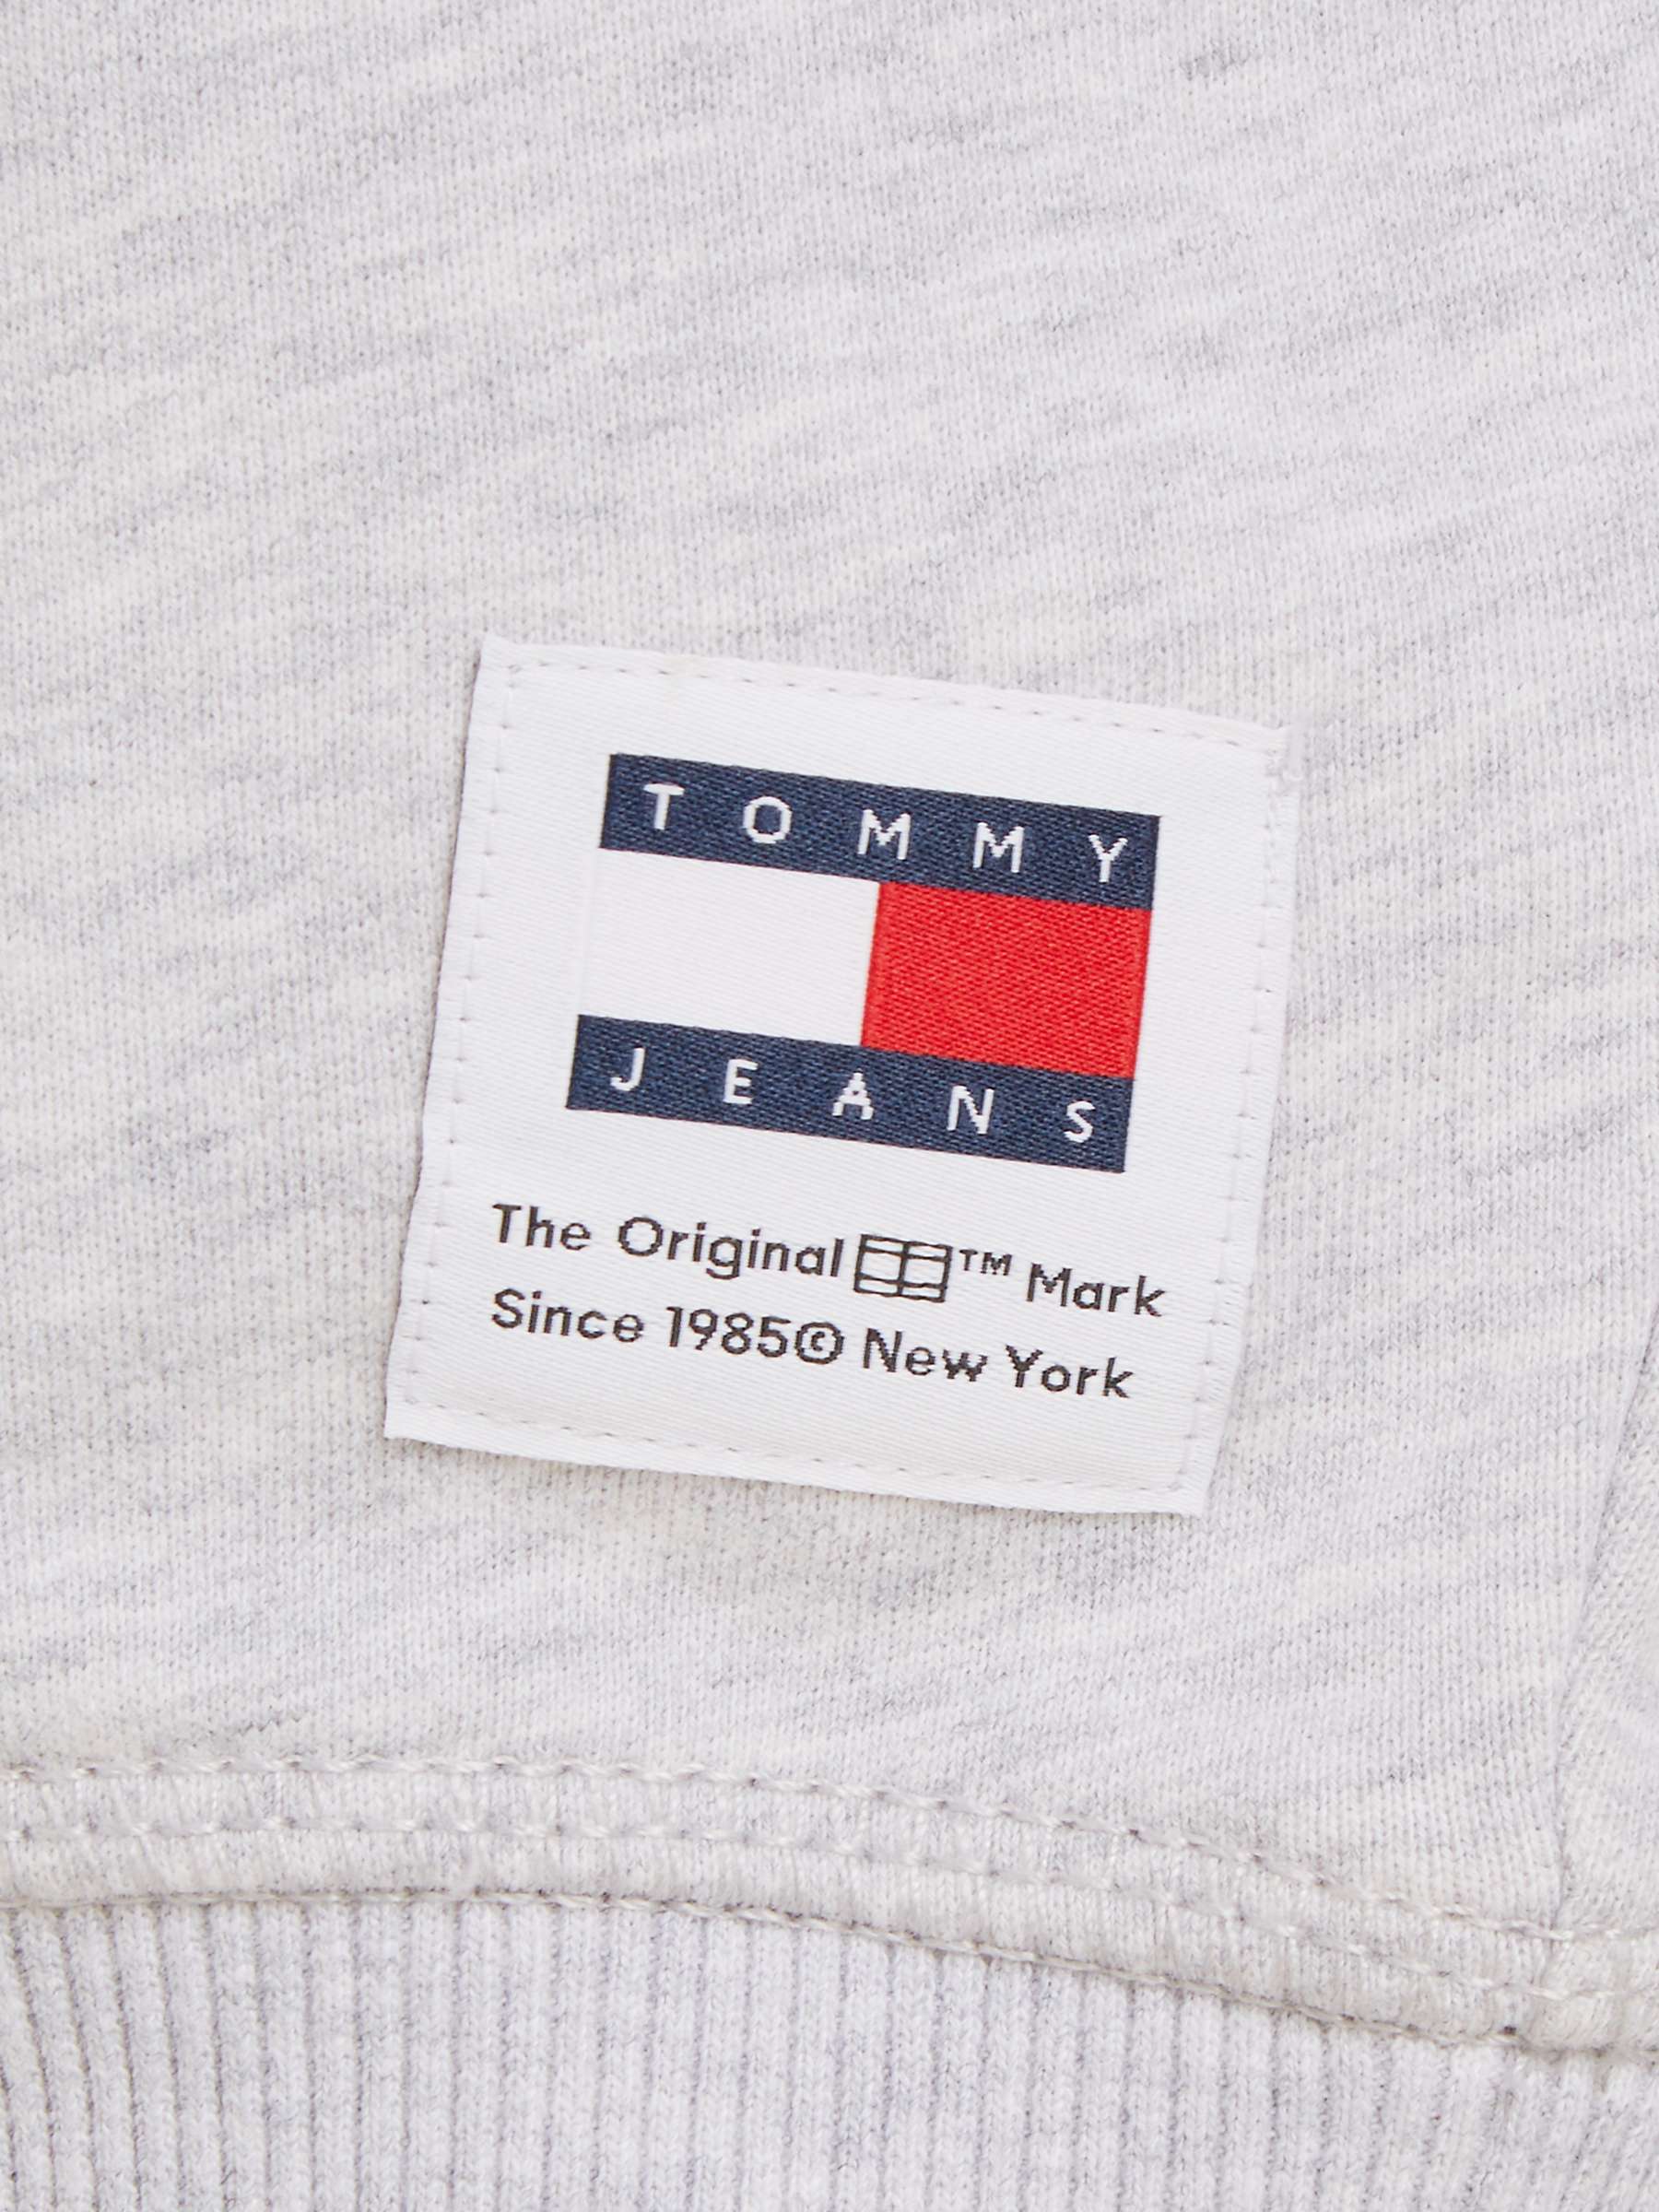 Buy Tommy Jeans Boxy Cotton Sweatshirt, Silver Grey Online at johnlewis.com